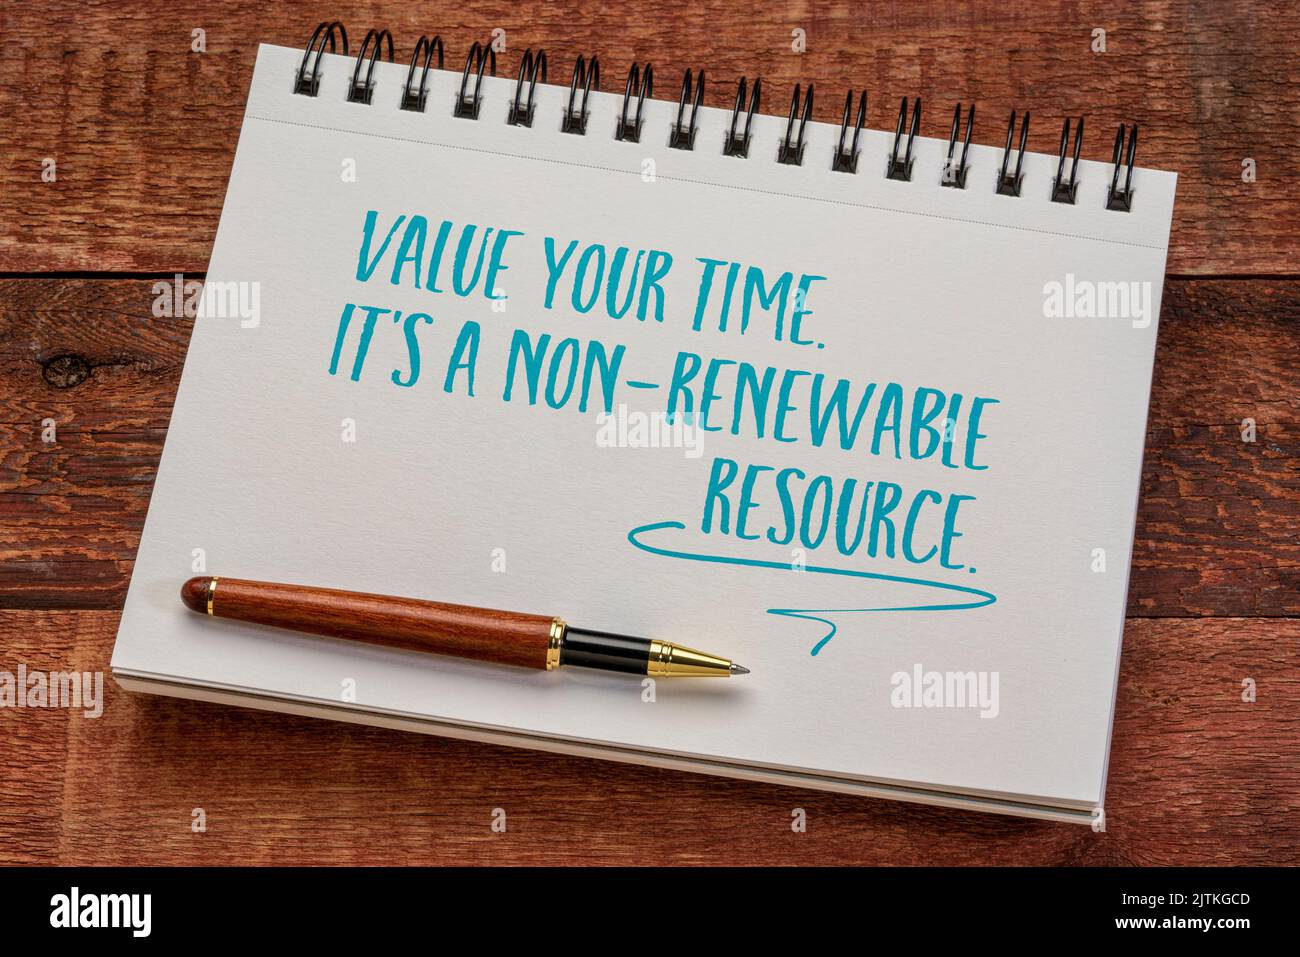 value your time, it's a non-renewable resource, writing in a spiral notebook against rustic wood, productivity and personal development concept Stock Photo